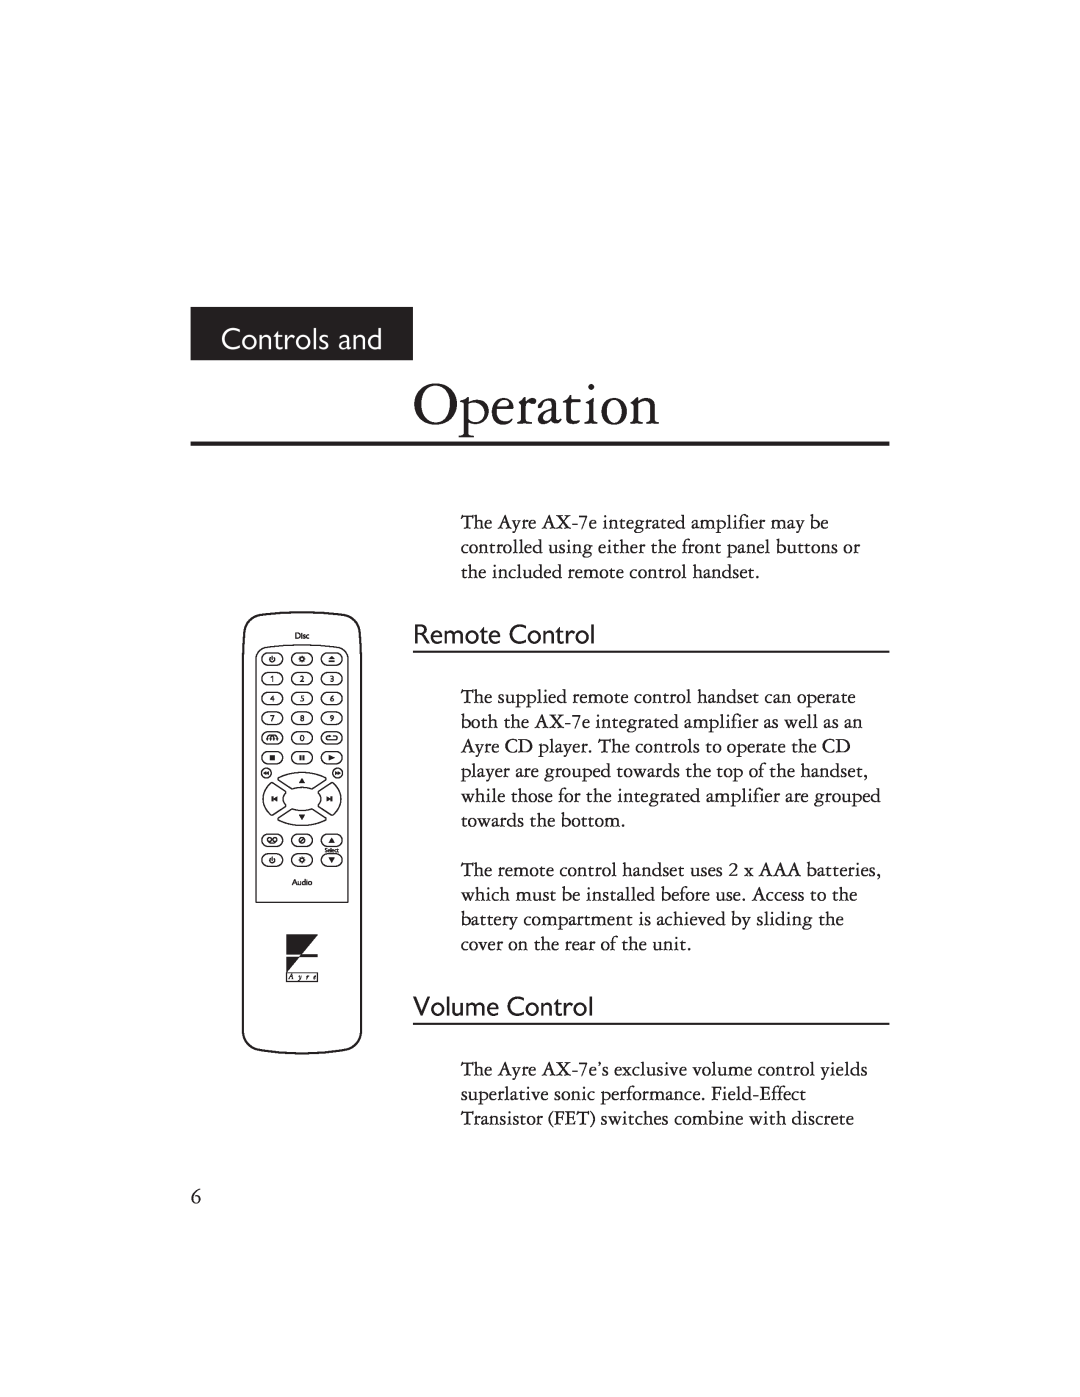 Ayre Acoustics AX-7E owner manual Operation, Controls and, Remote Control, Volume Control 